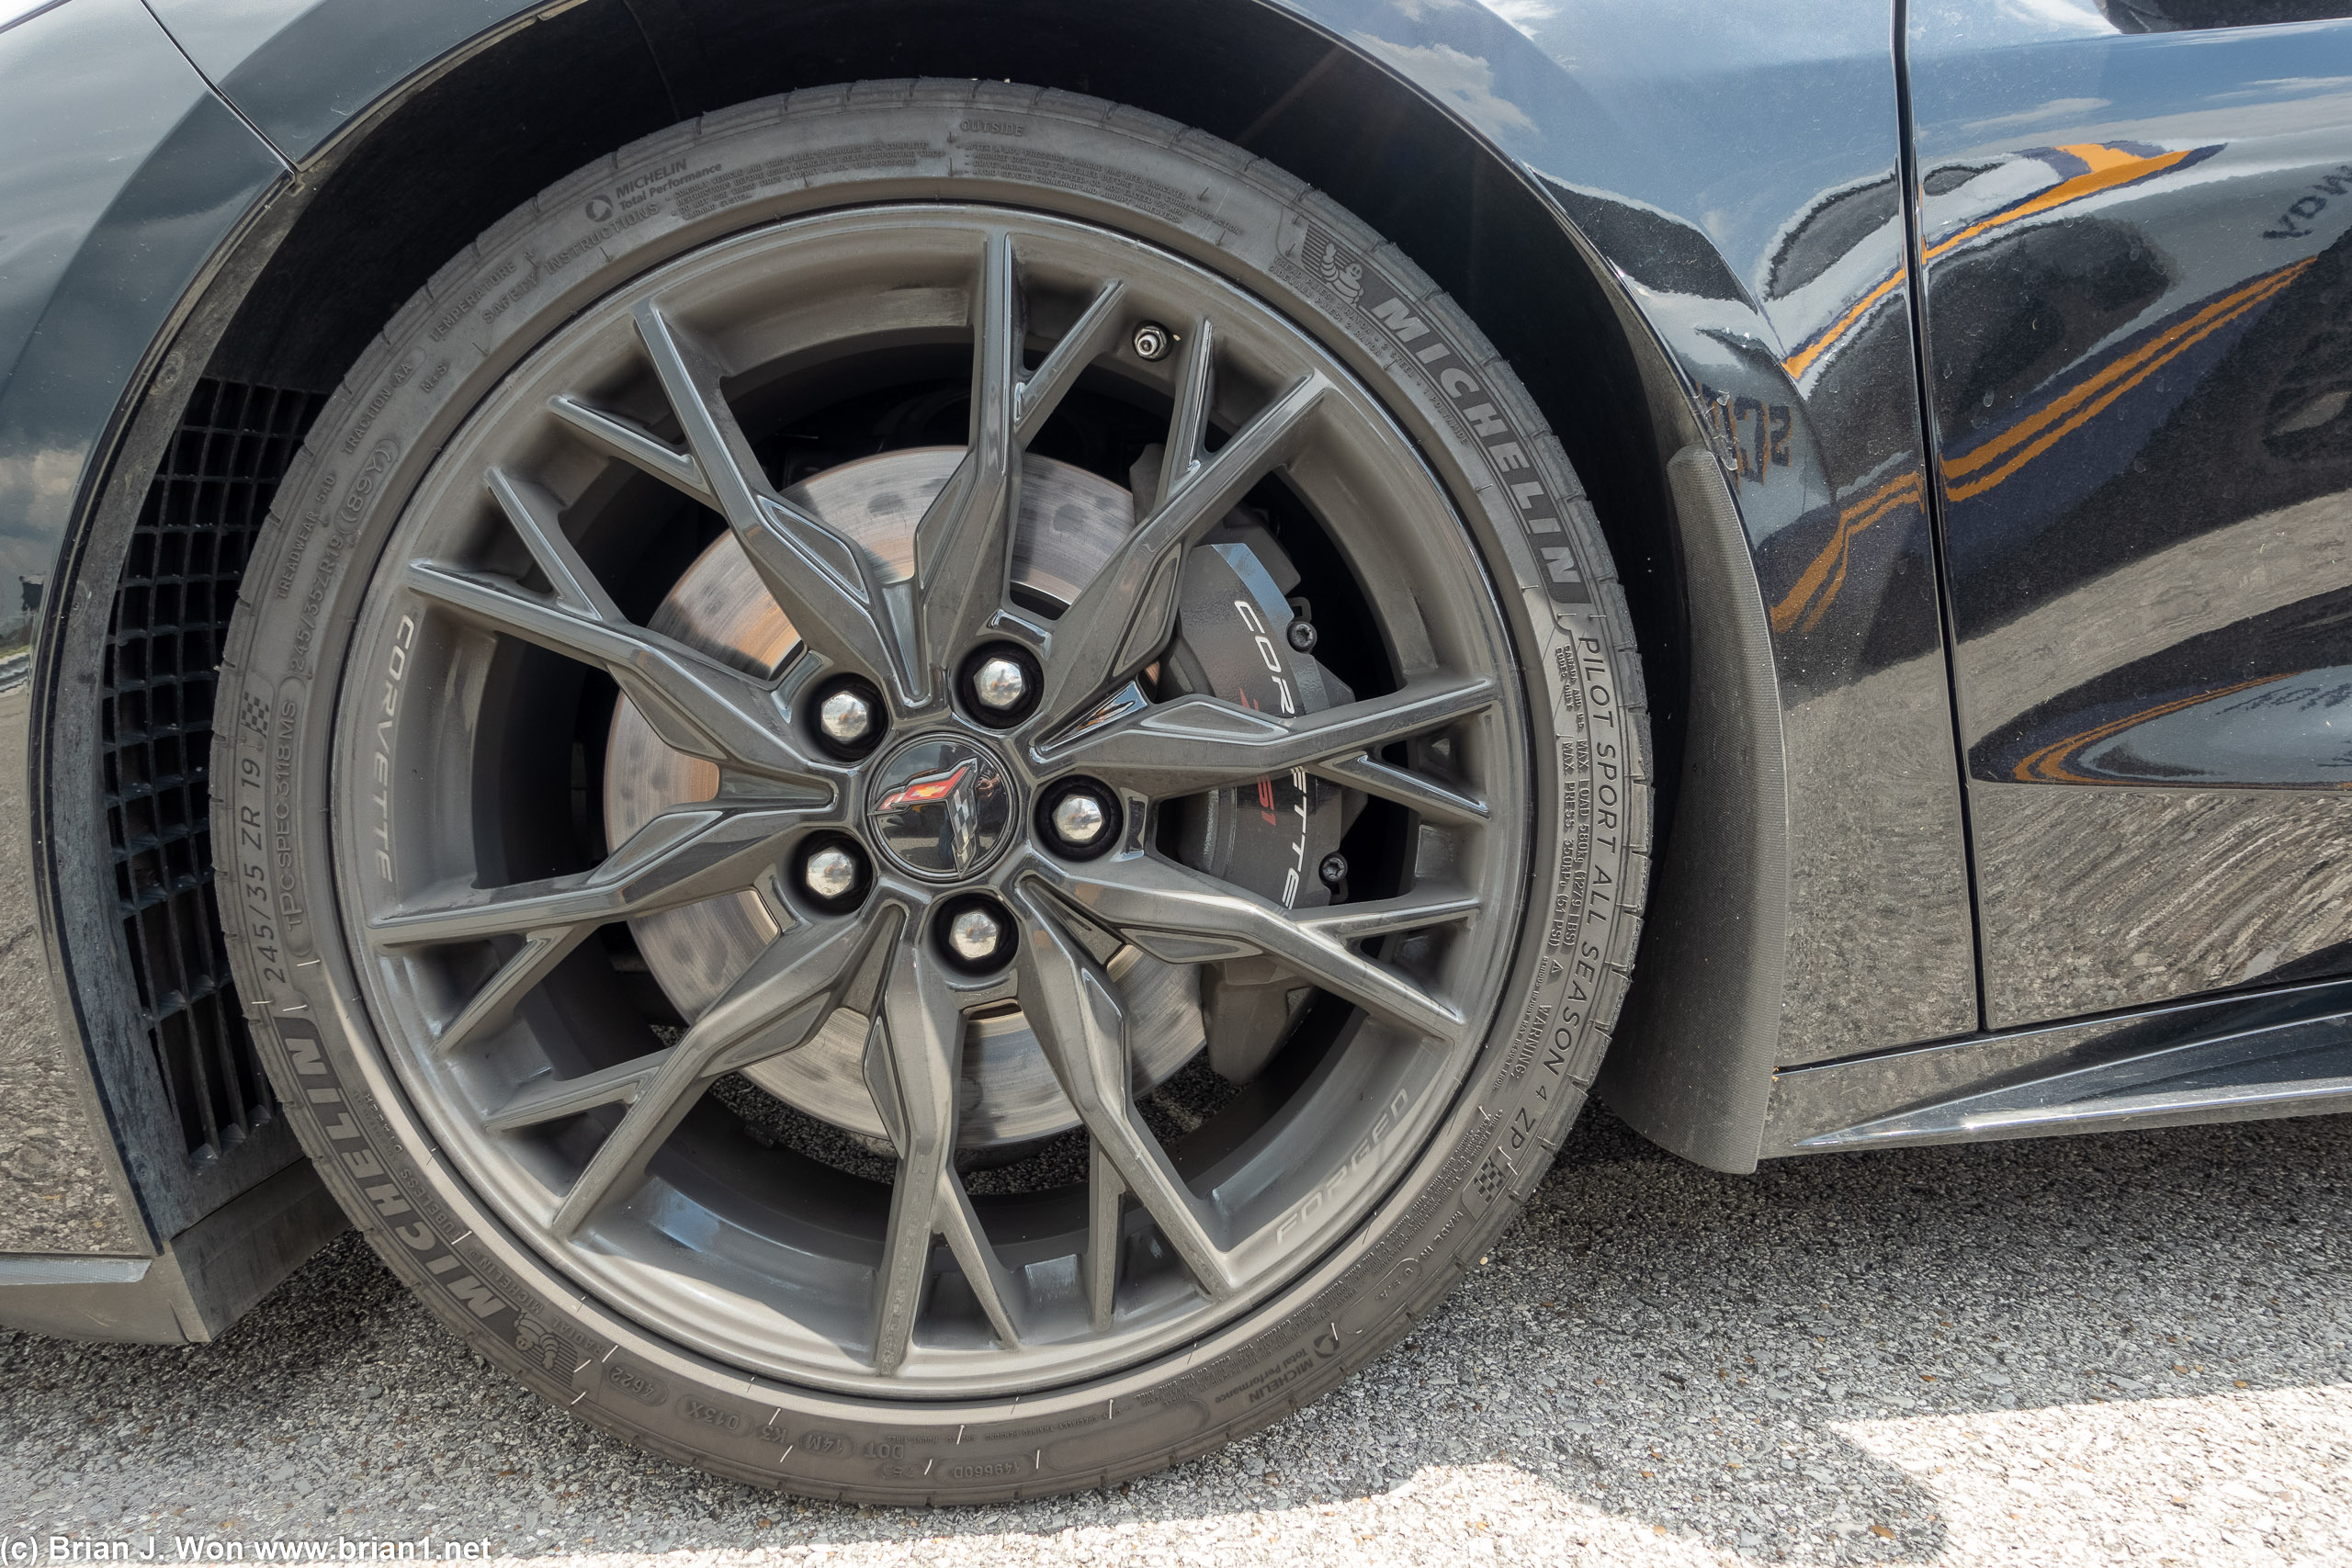 Michelin Pilot Sport All Season 4 ZP 245/35/19 fronts over the Z51 brake package.